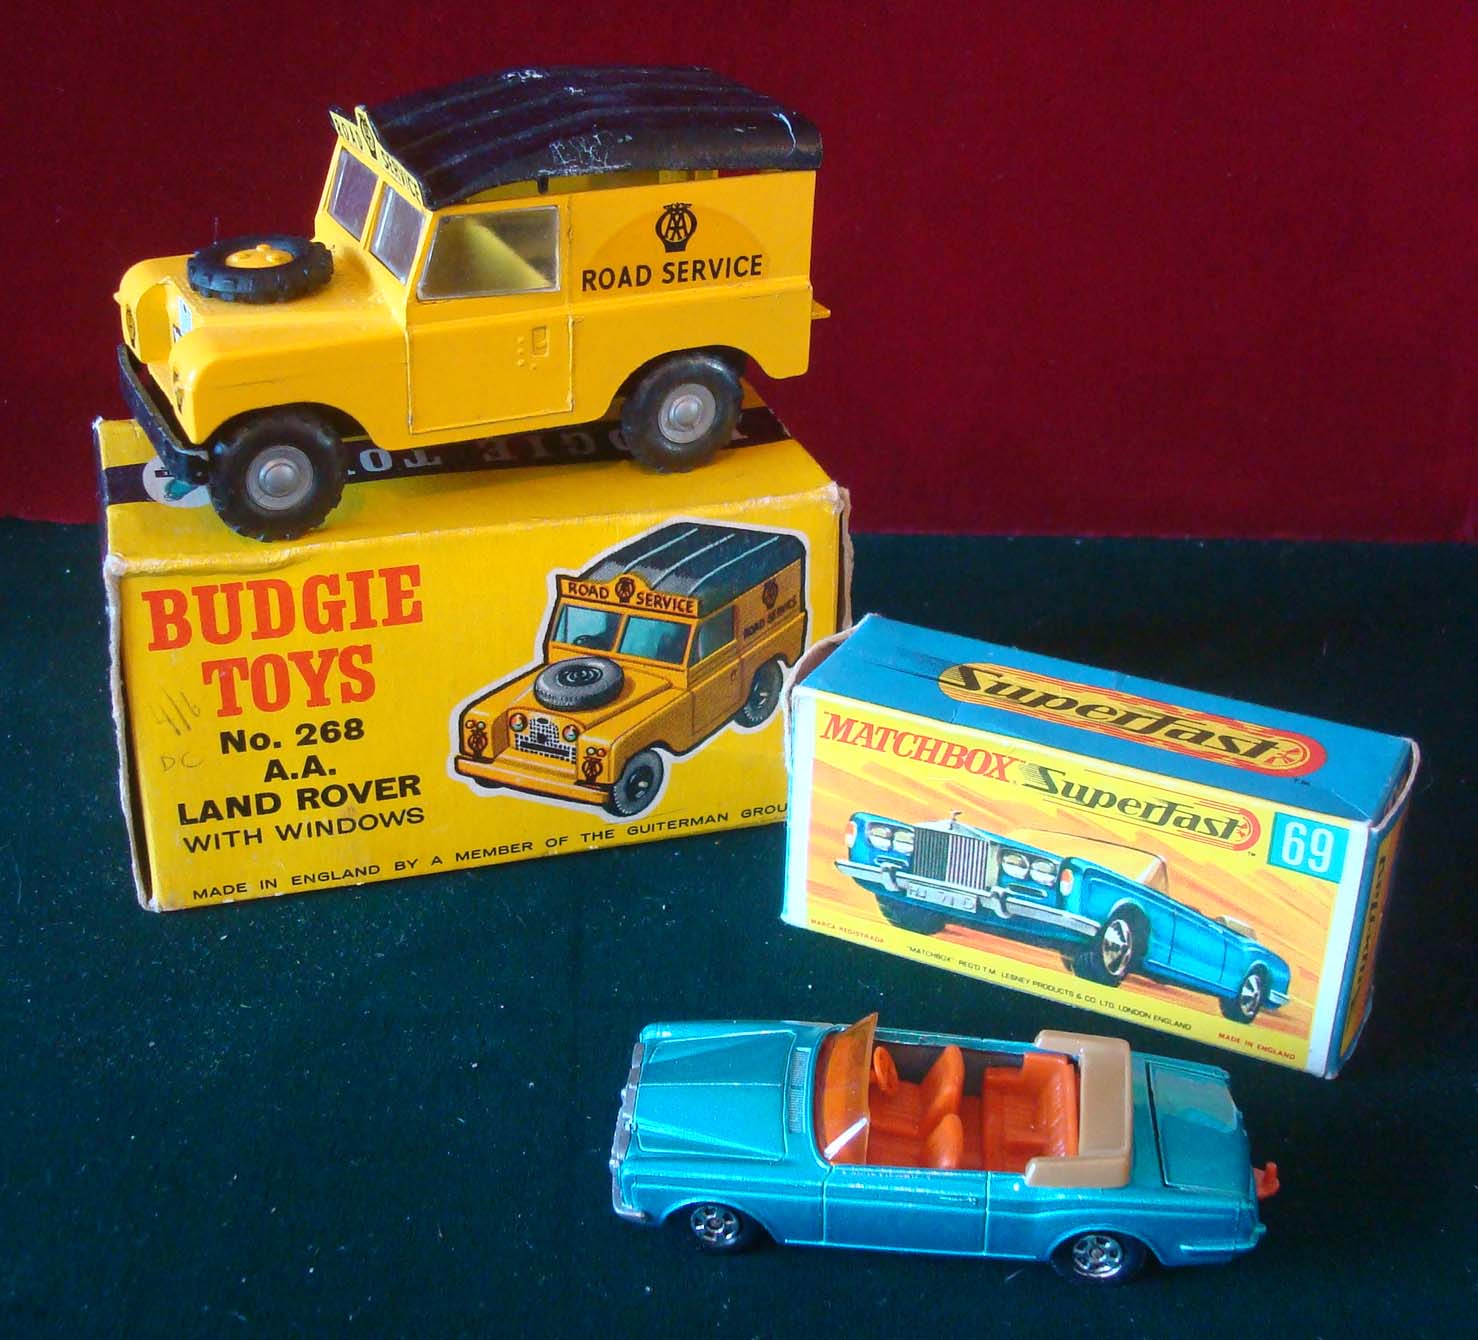 Budgie and Matchbox Cars: To consist of Budgie Toys u 268 A.A. Land rover (having bend in roof)